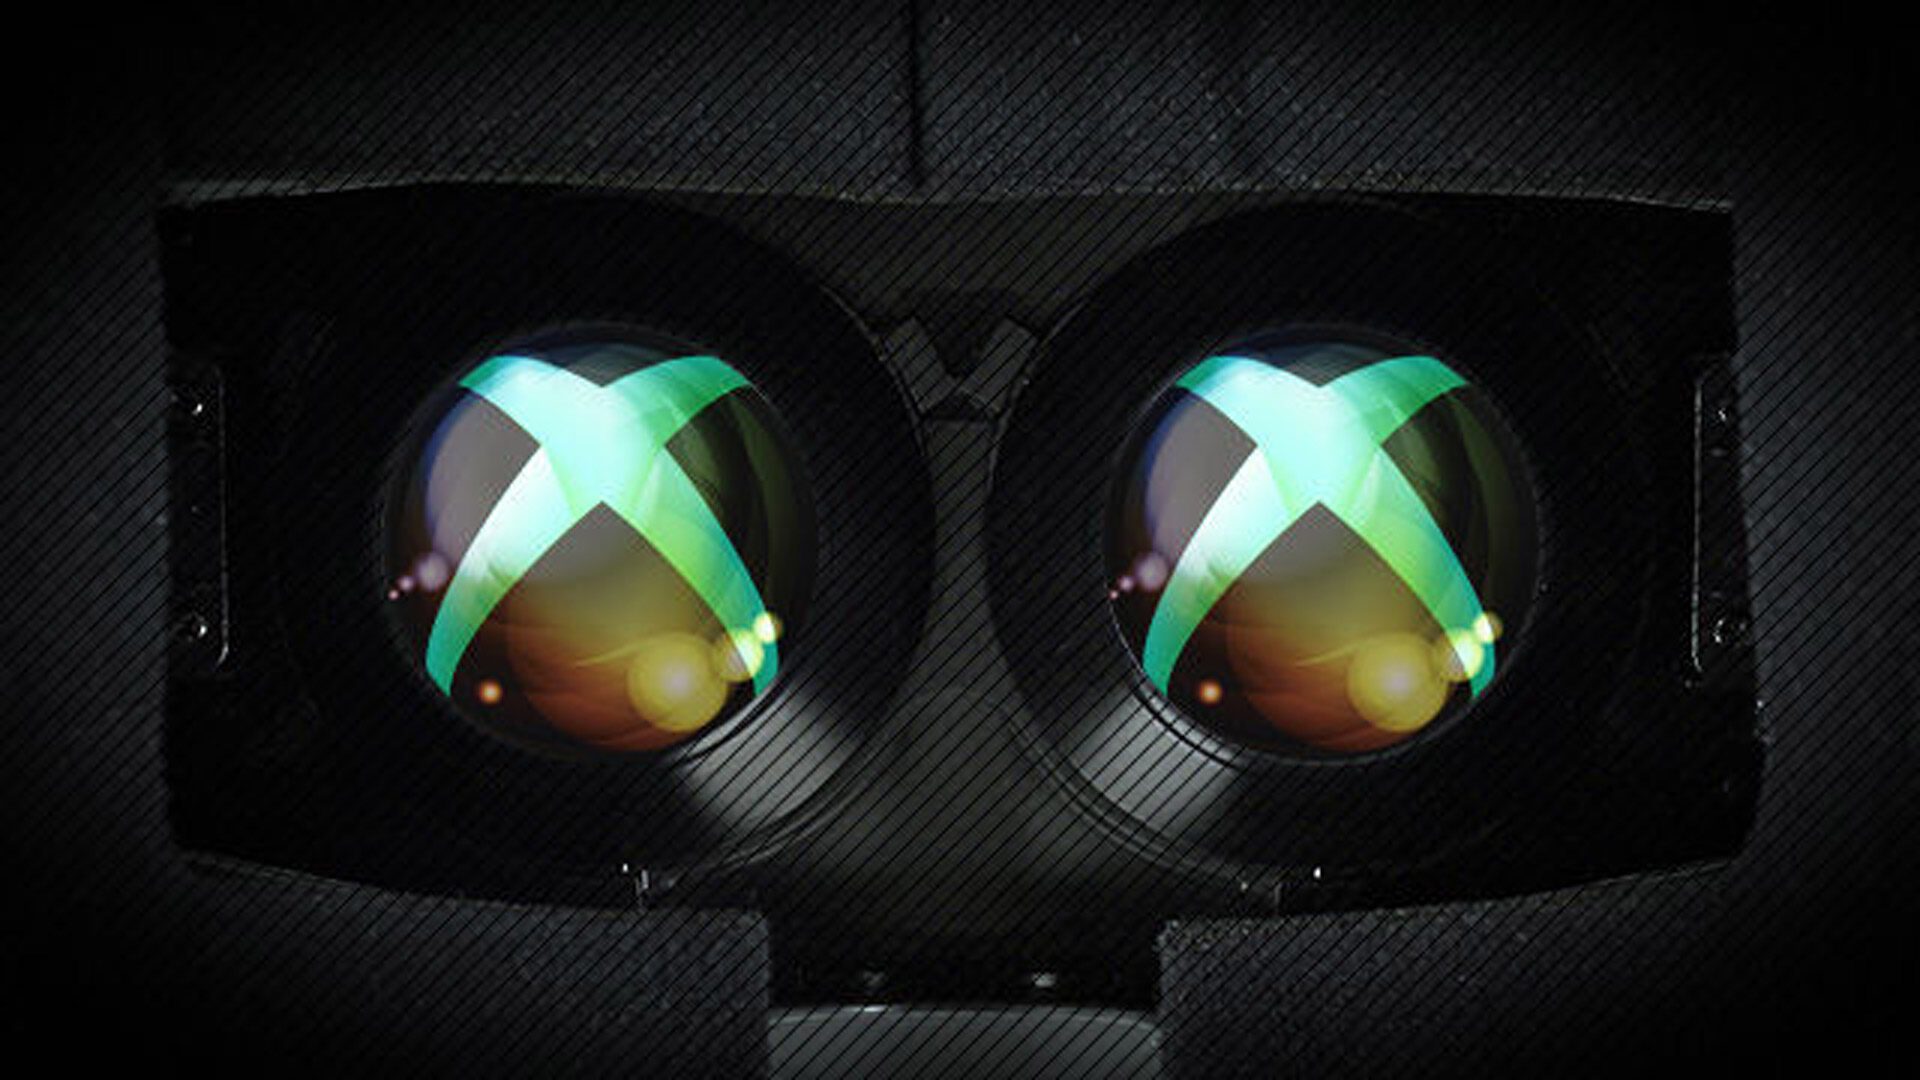 E3 Website Accidentally Releases Xbox One VR Information